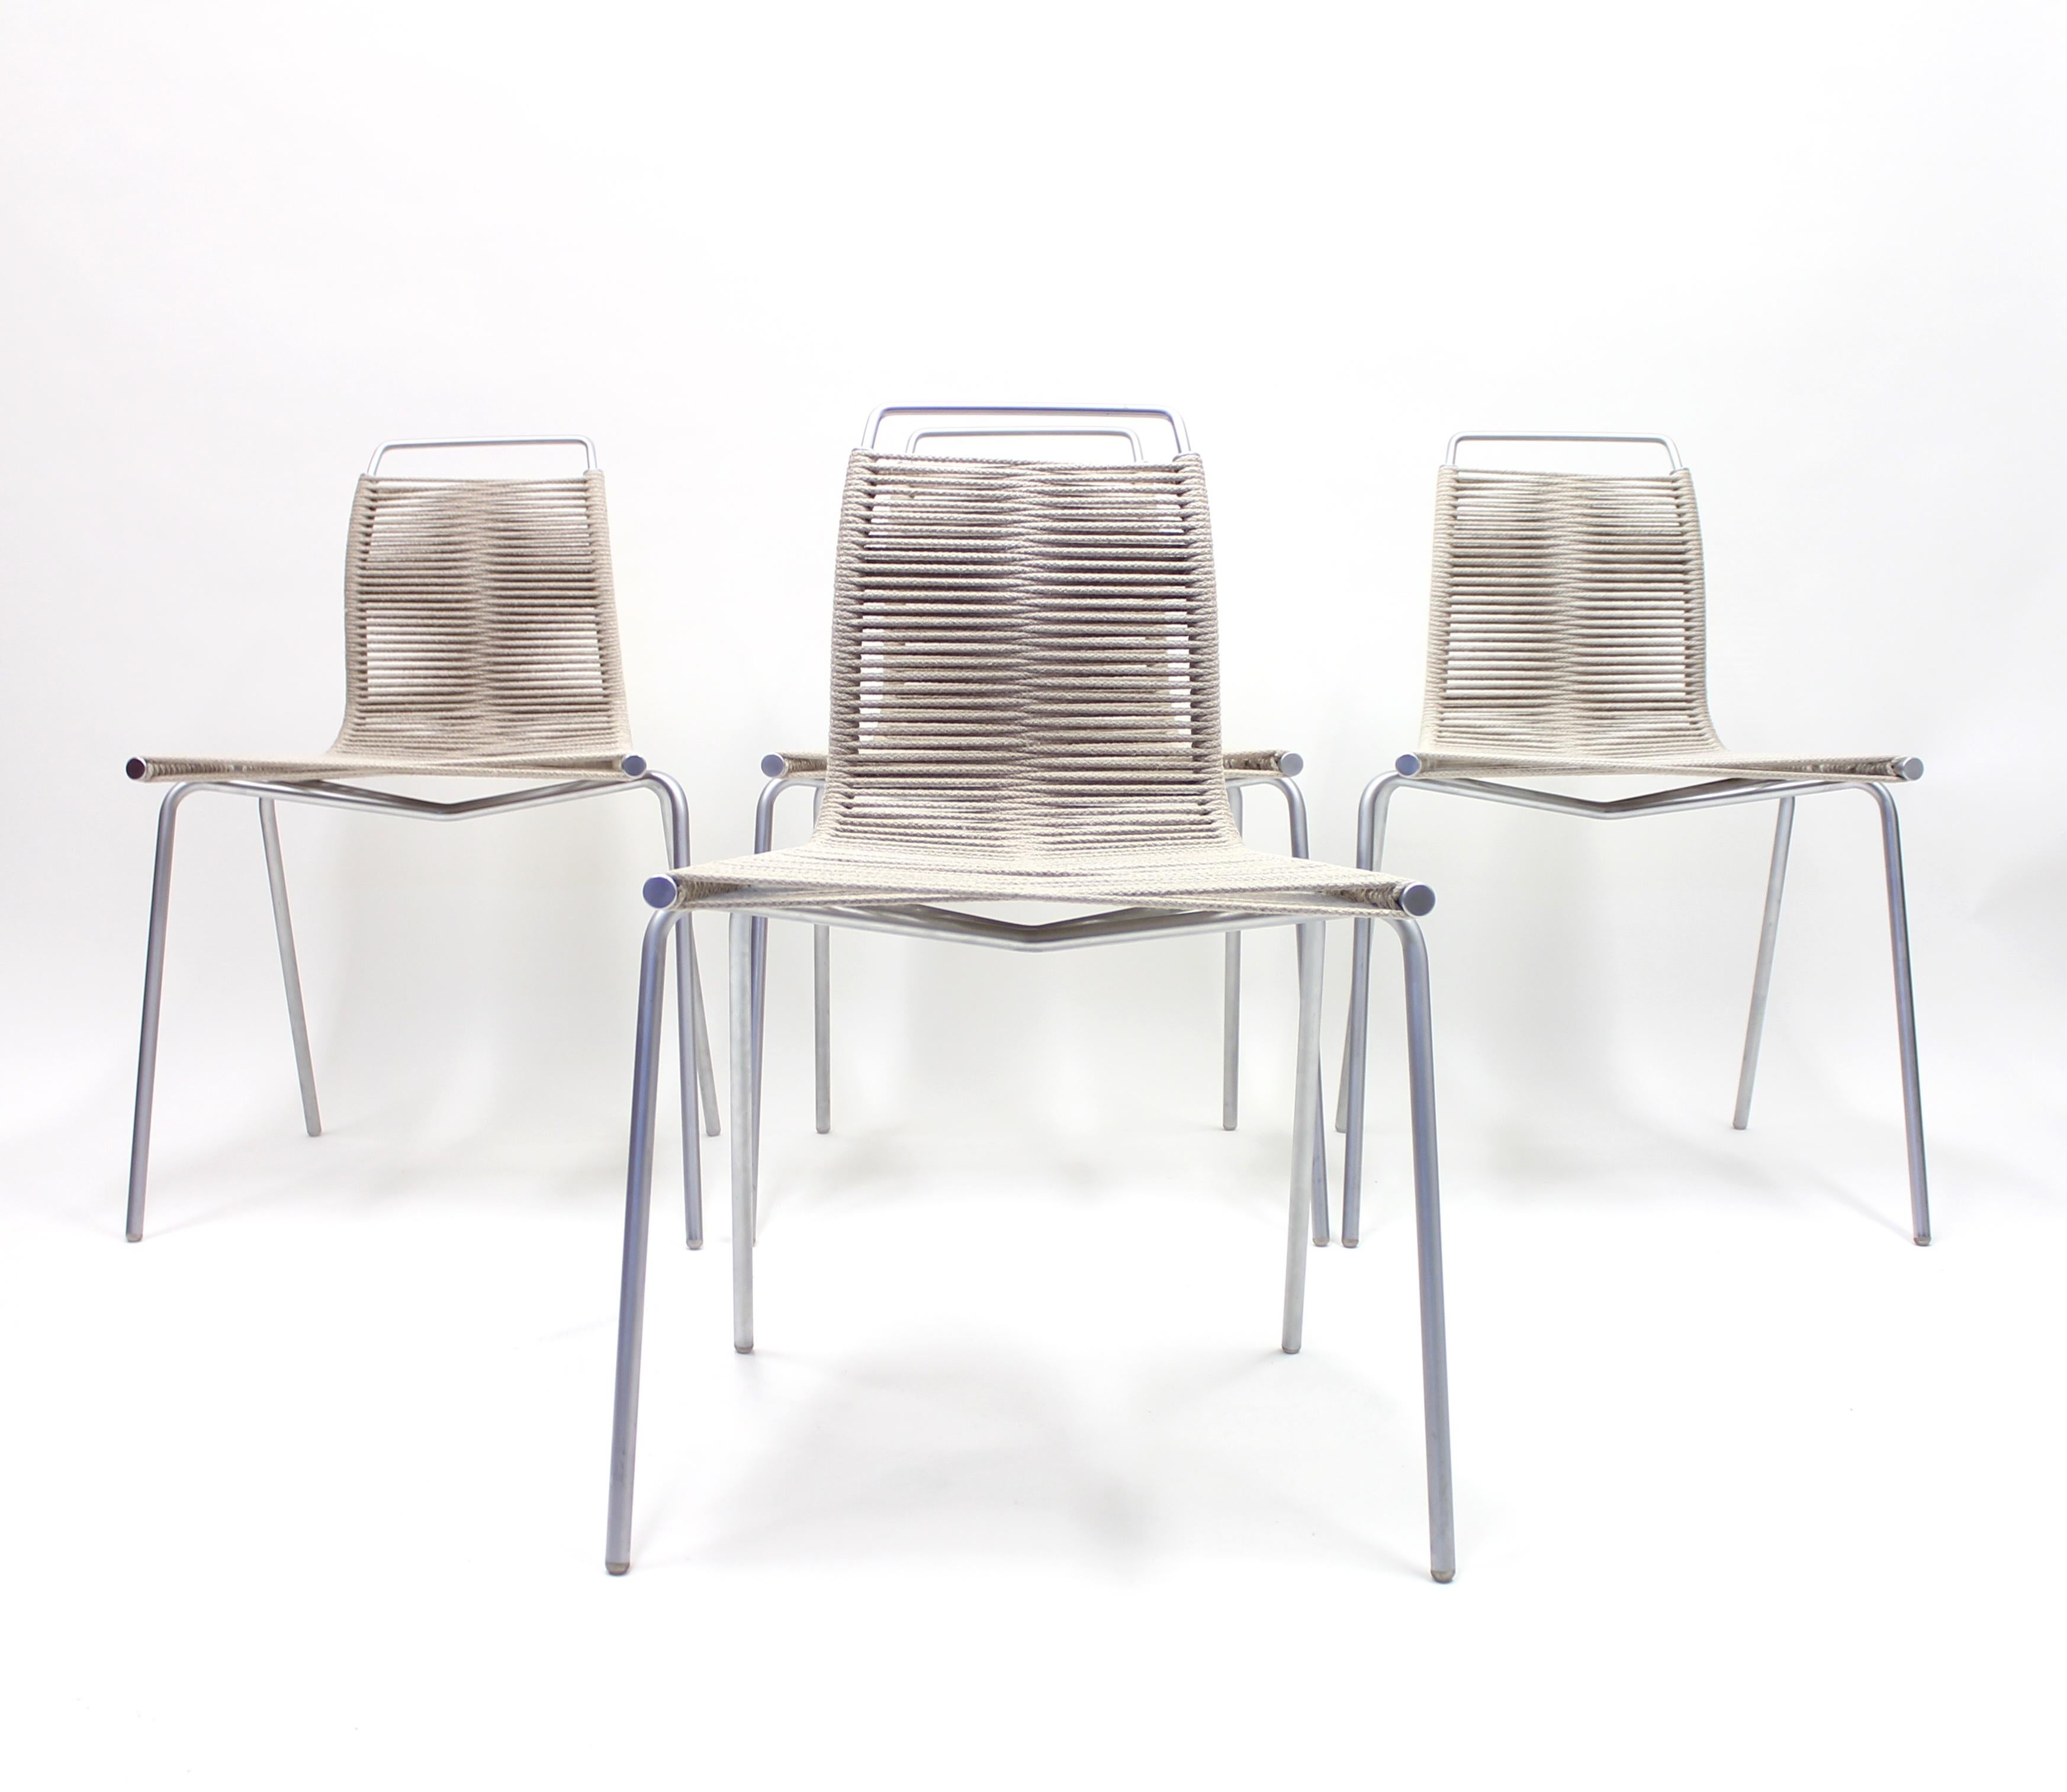 PK1 Chairs by Poul Kjærholm for Thorsen Møbler, Set of 4 1